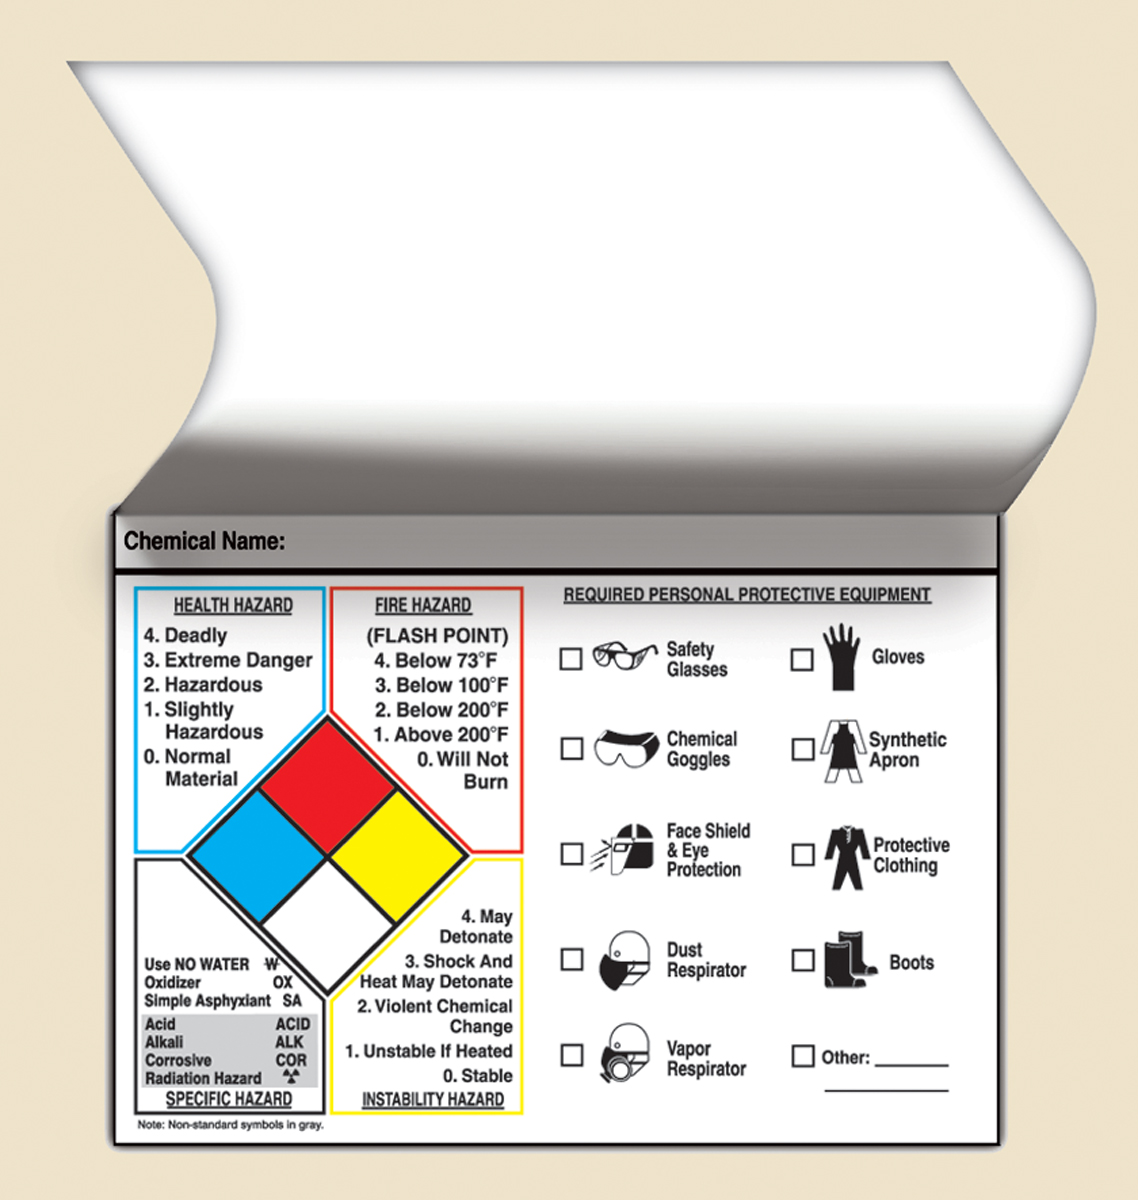 Self-Laminating NFPA Protective Equipment Label